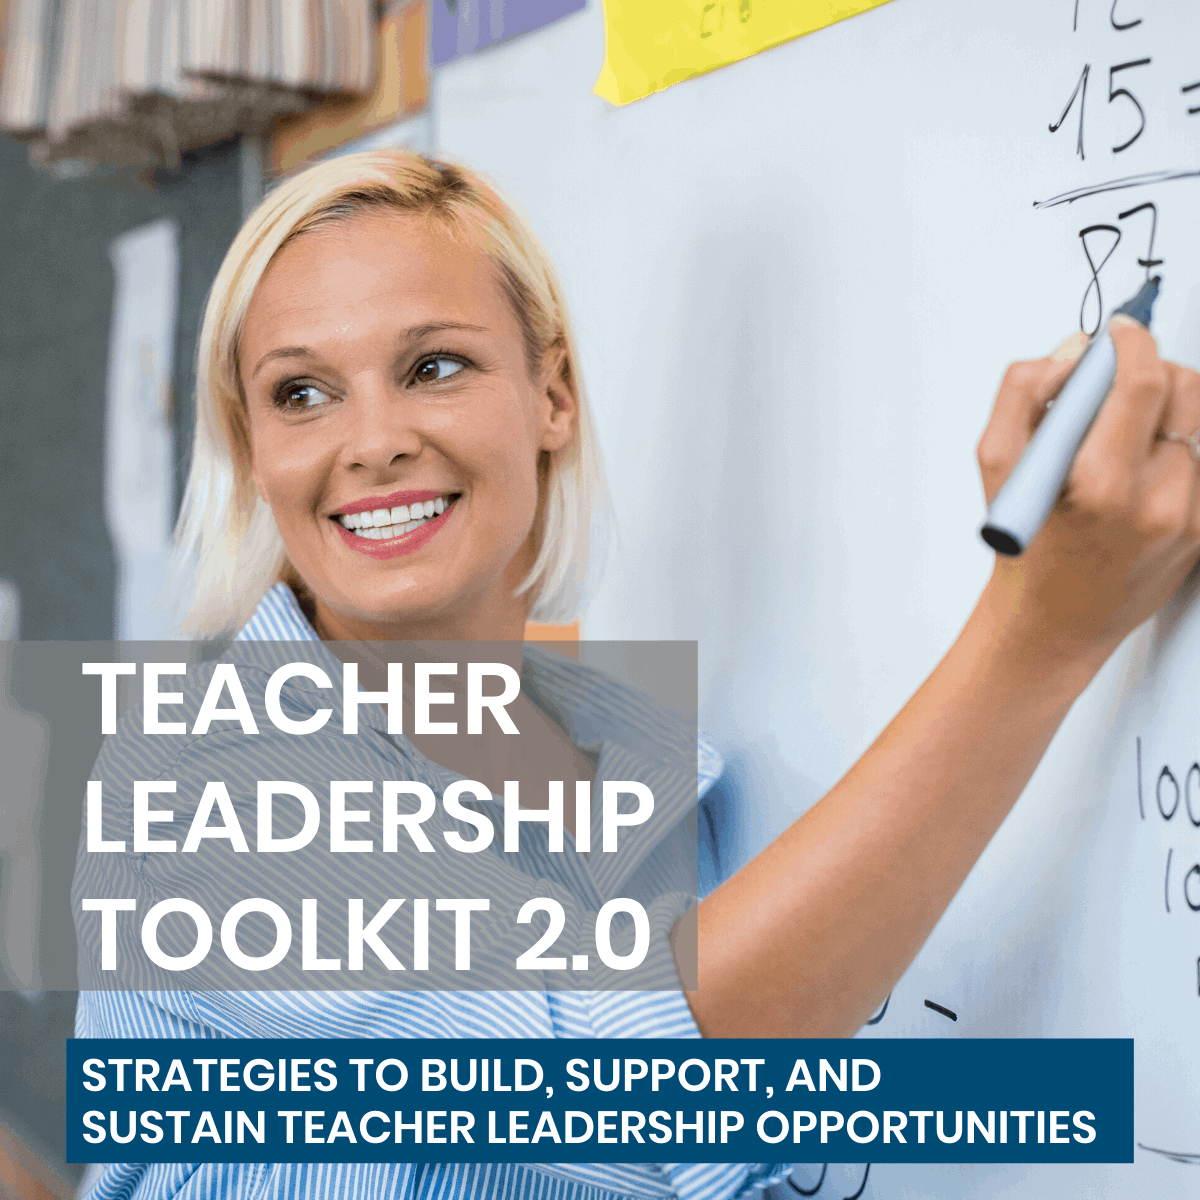 what does the research tell us about teacher leadership